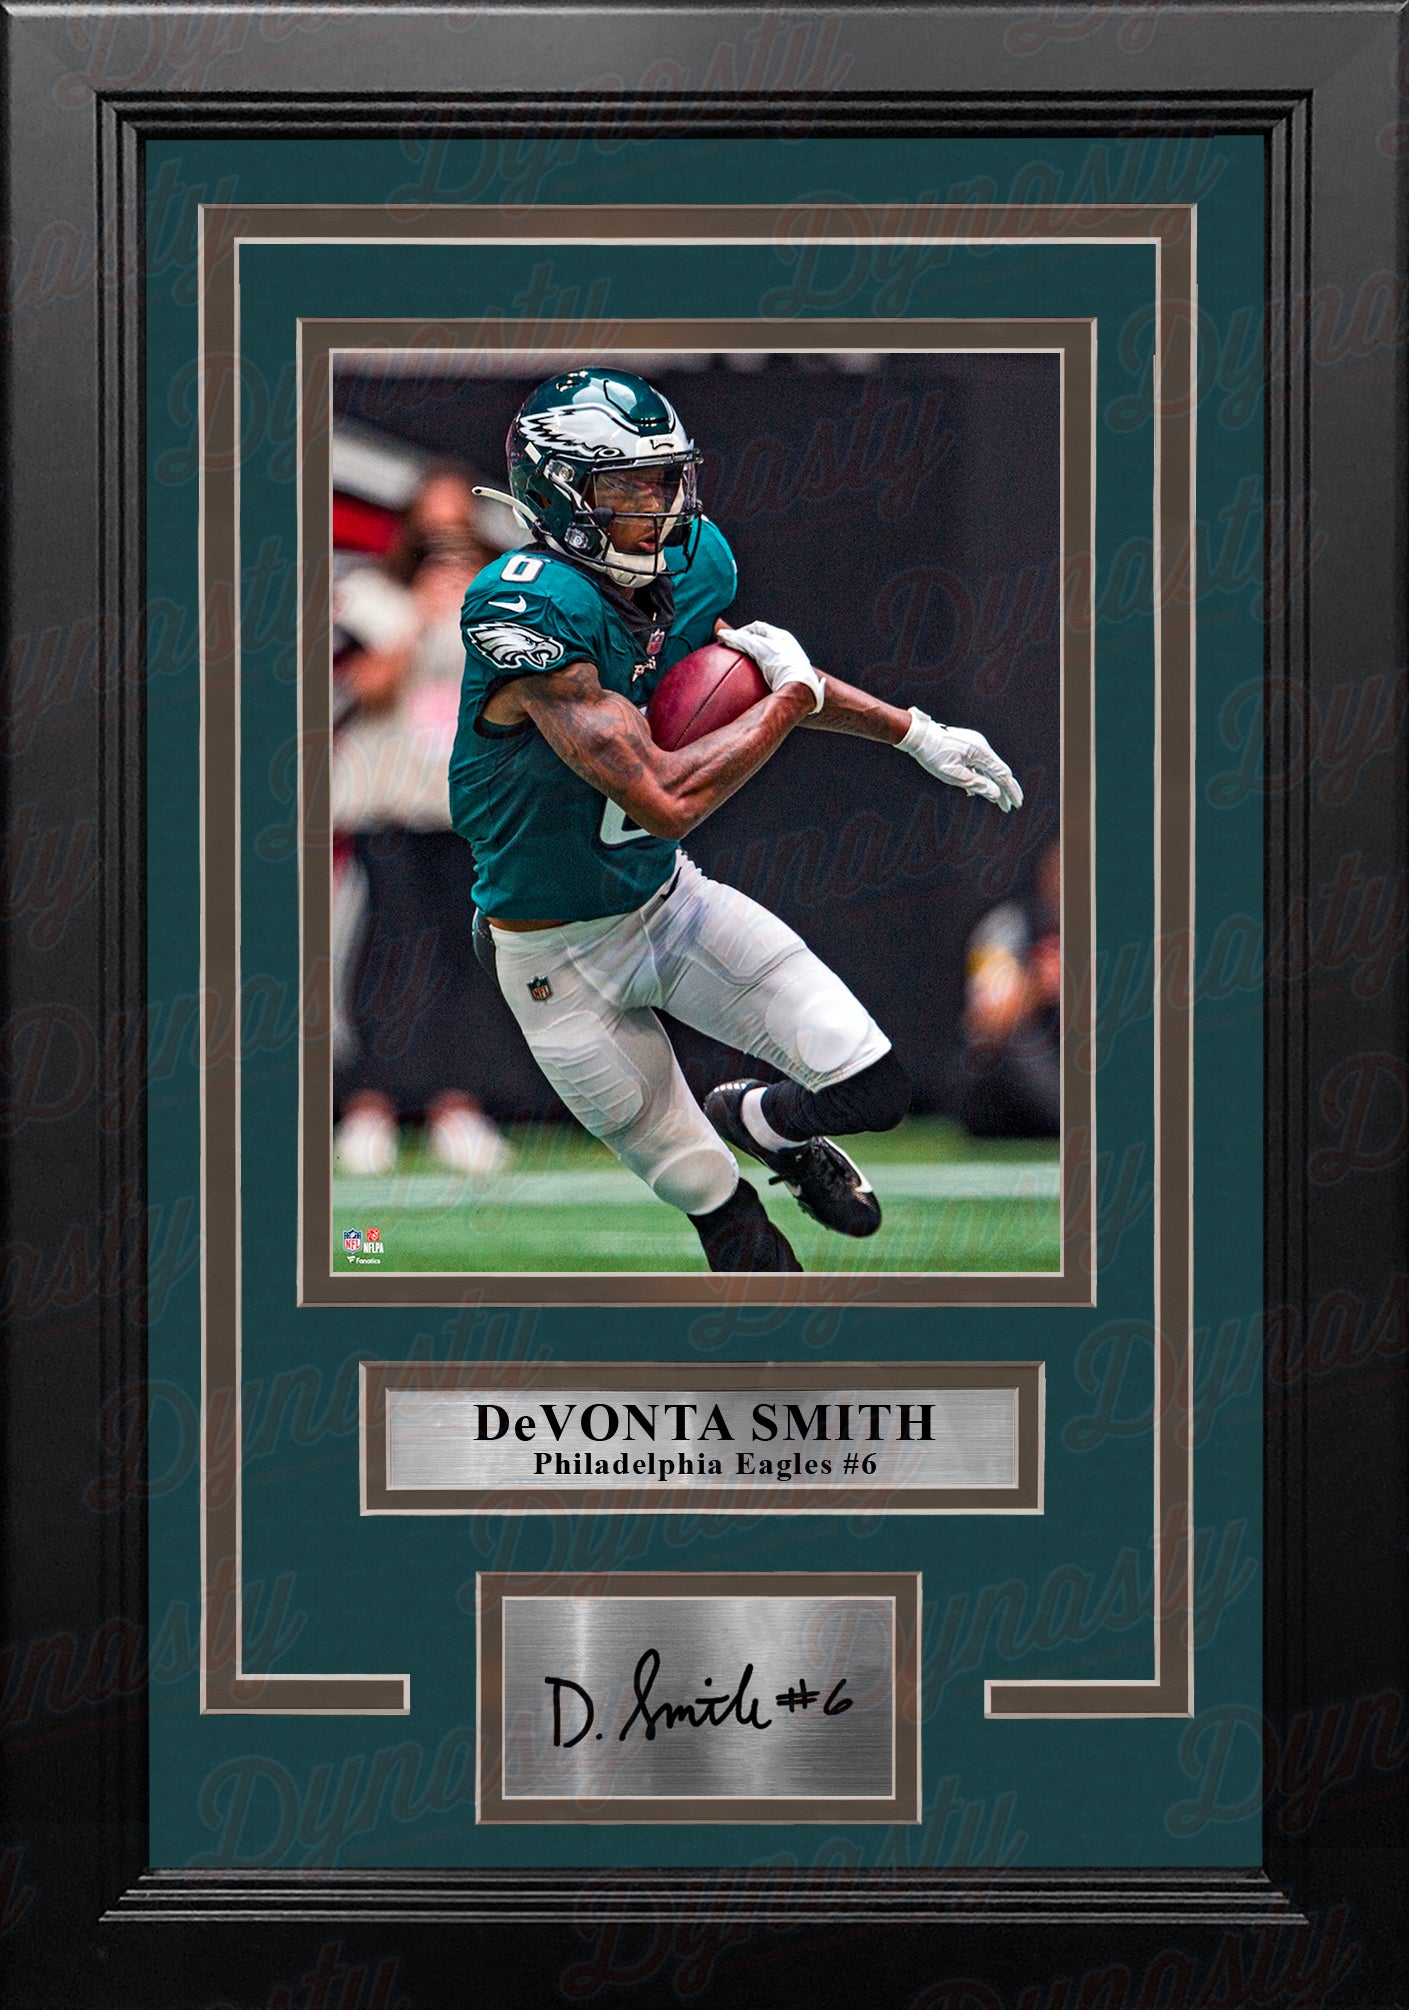 DeVonta Smith in Action Philadelphia Eagles 8" x 10" Framed Football Photo with Engraved Autograph - Dynasty Sports & Framing 